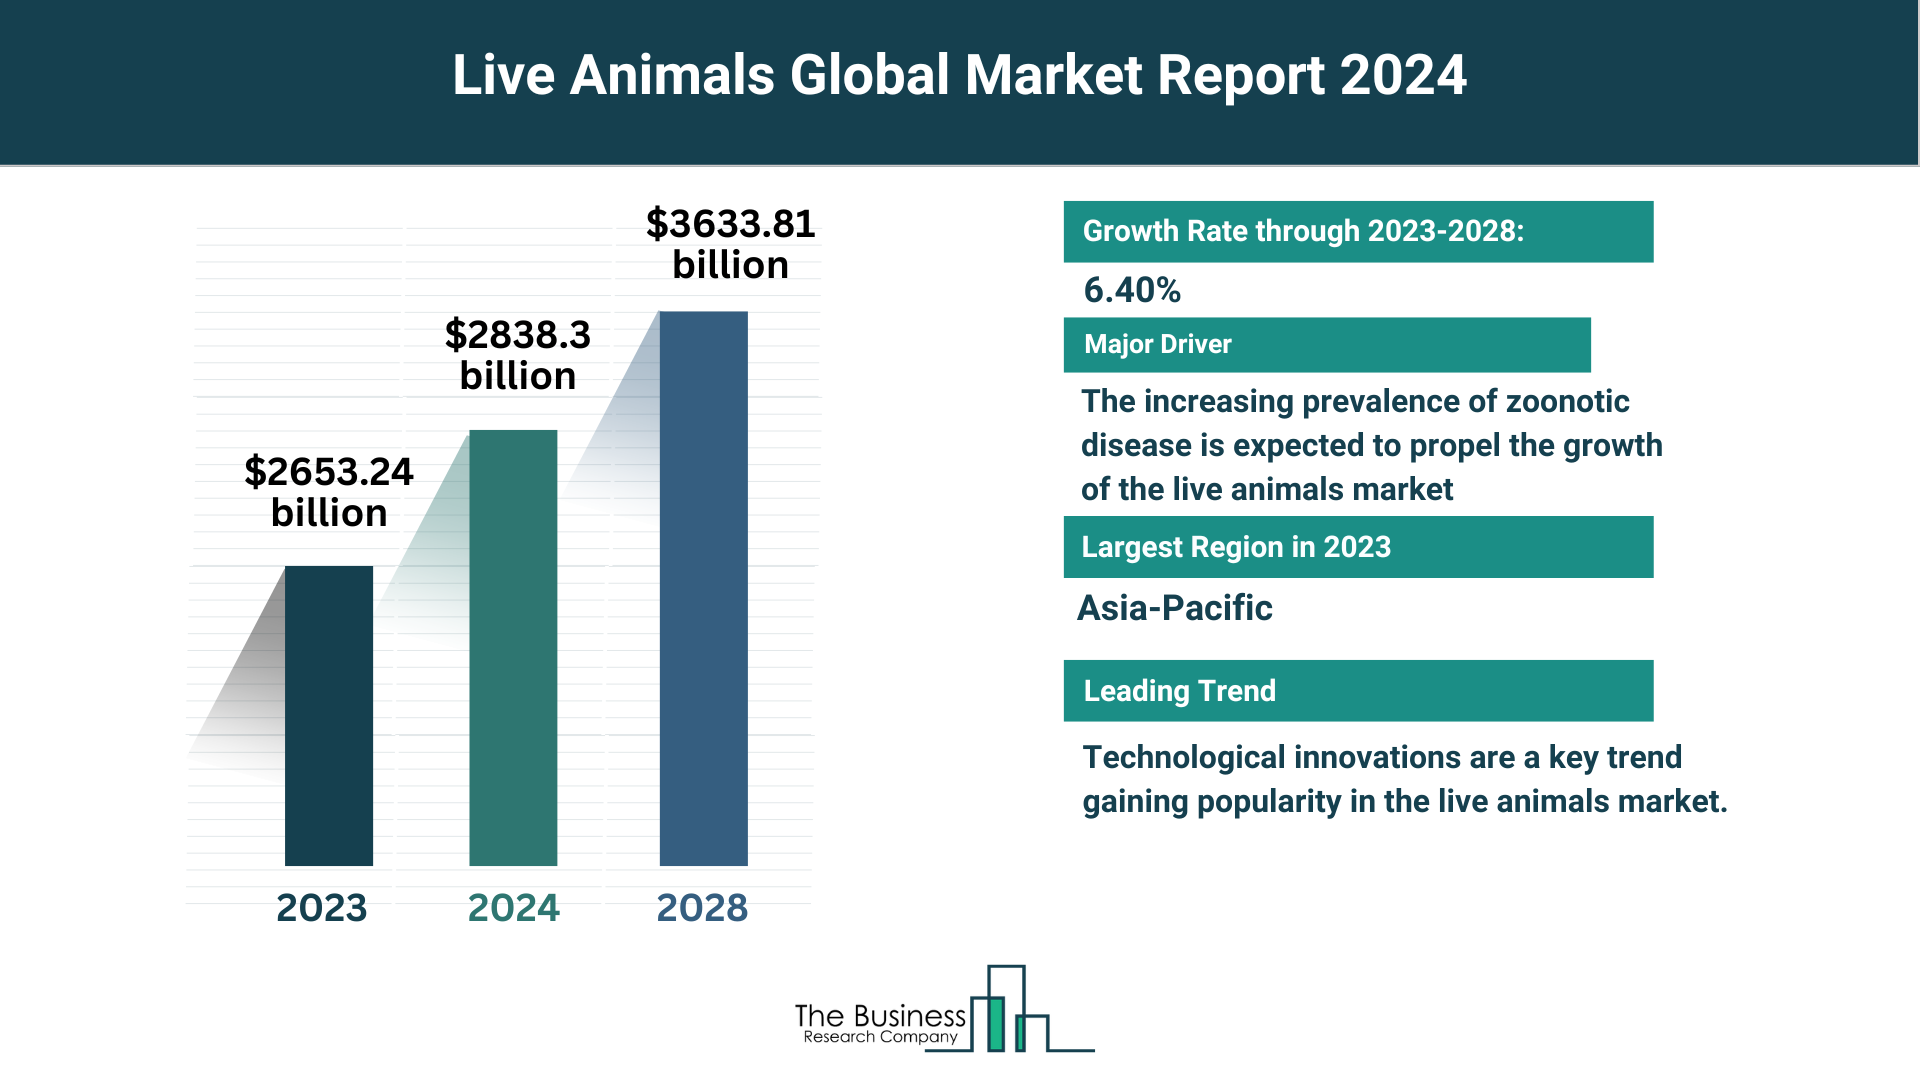 What Are The 5 Top Insights From The Live Animals Market Forecast 2024